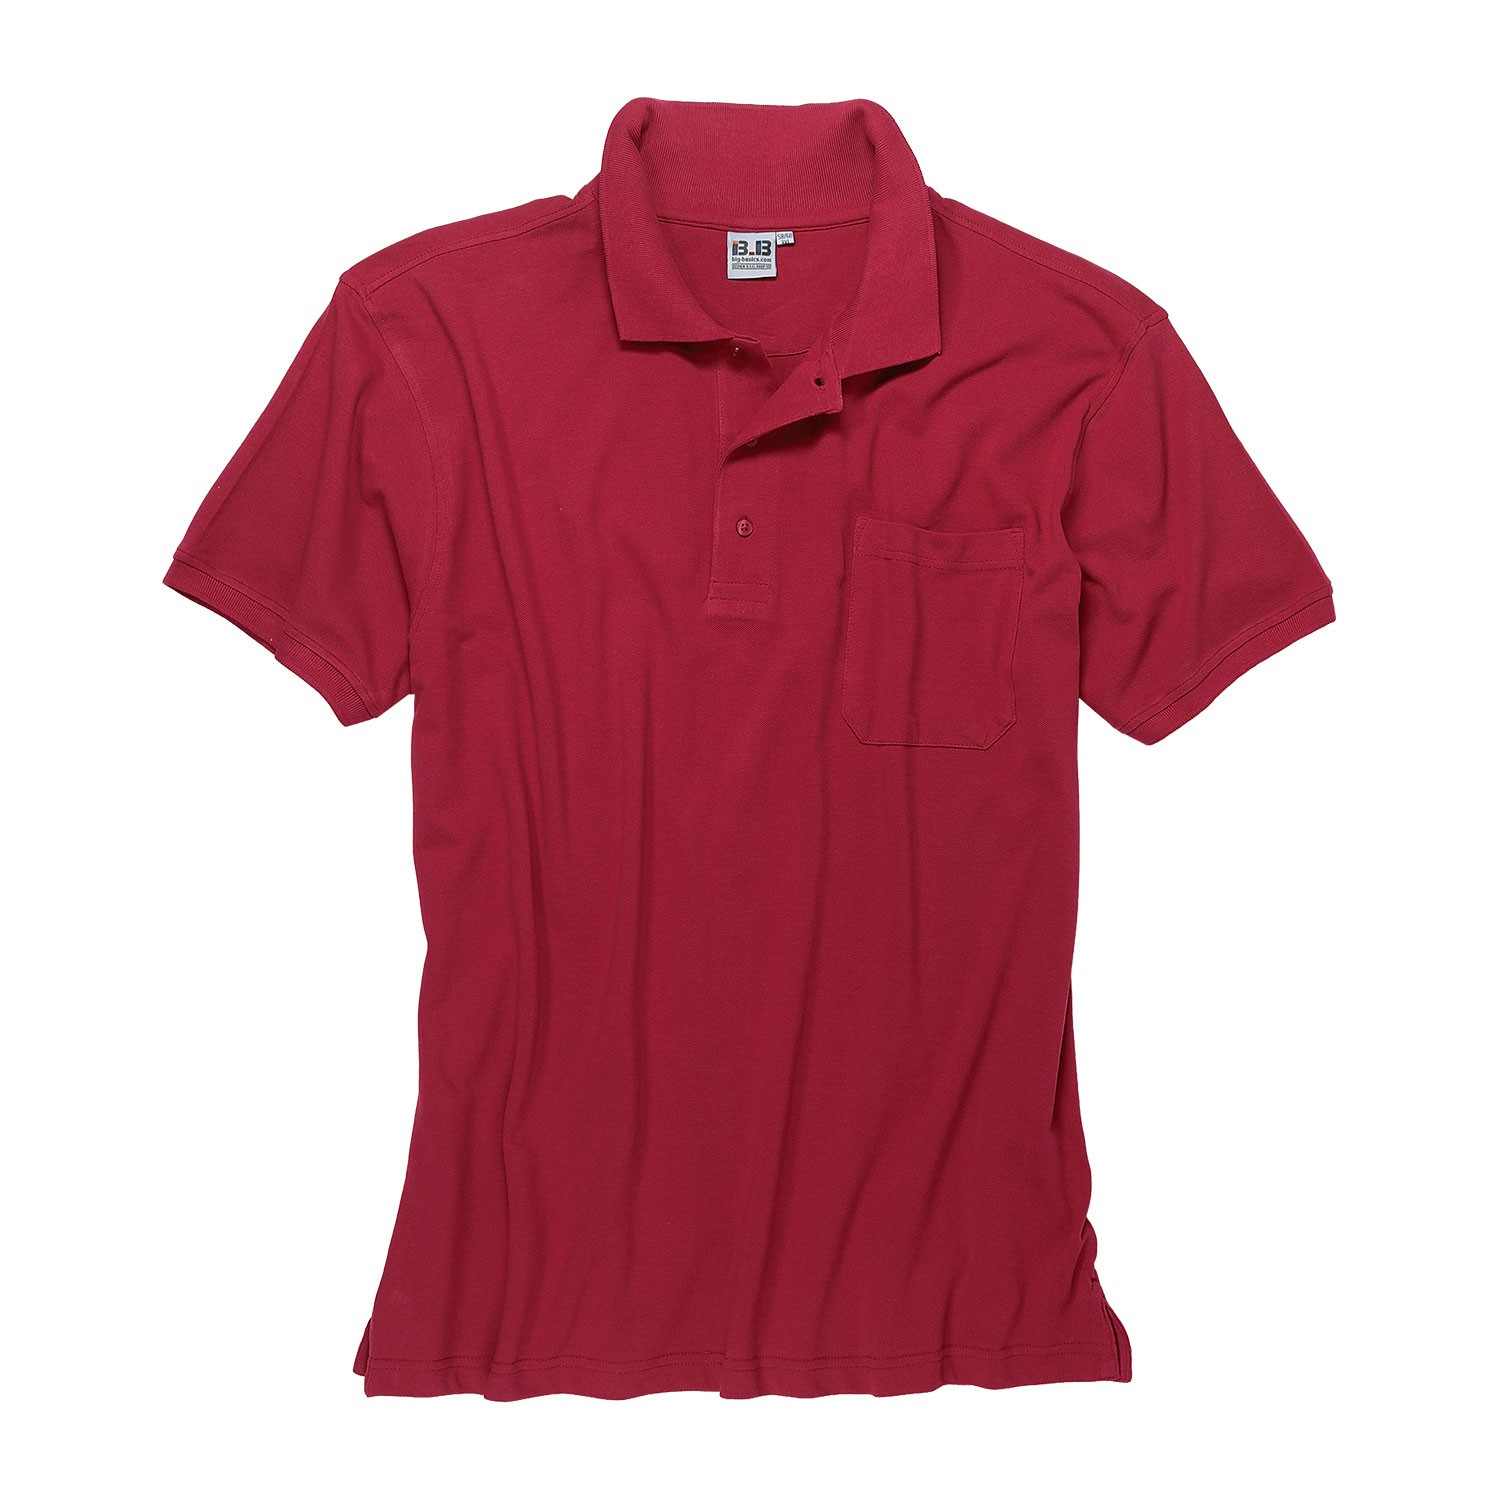 Red polo shirt by Big-Basics in oversizes up to 8XL